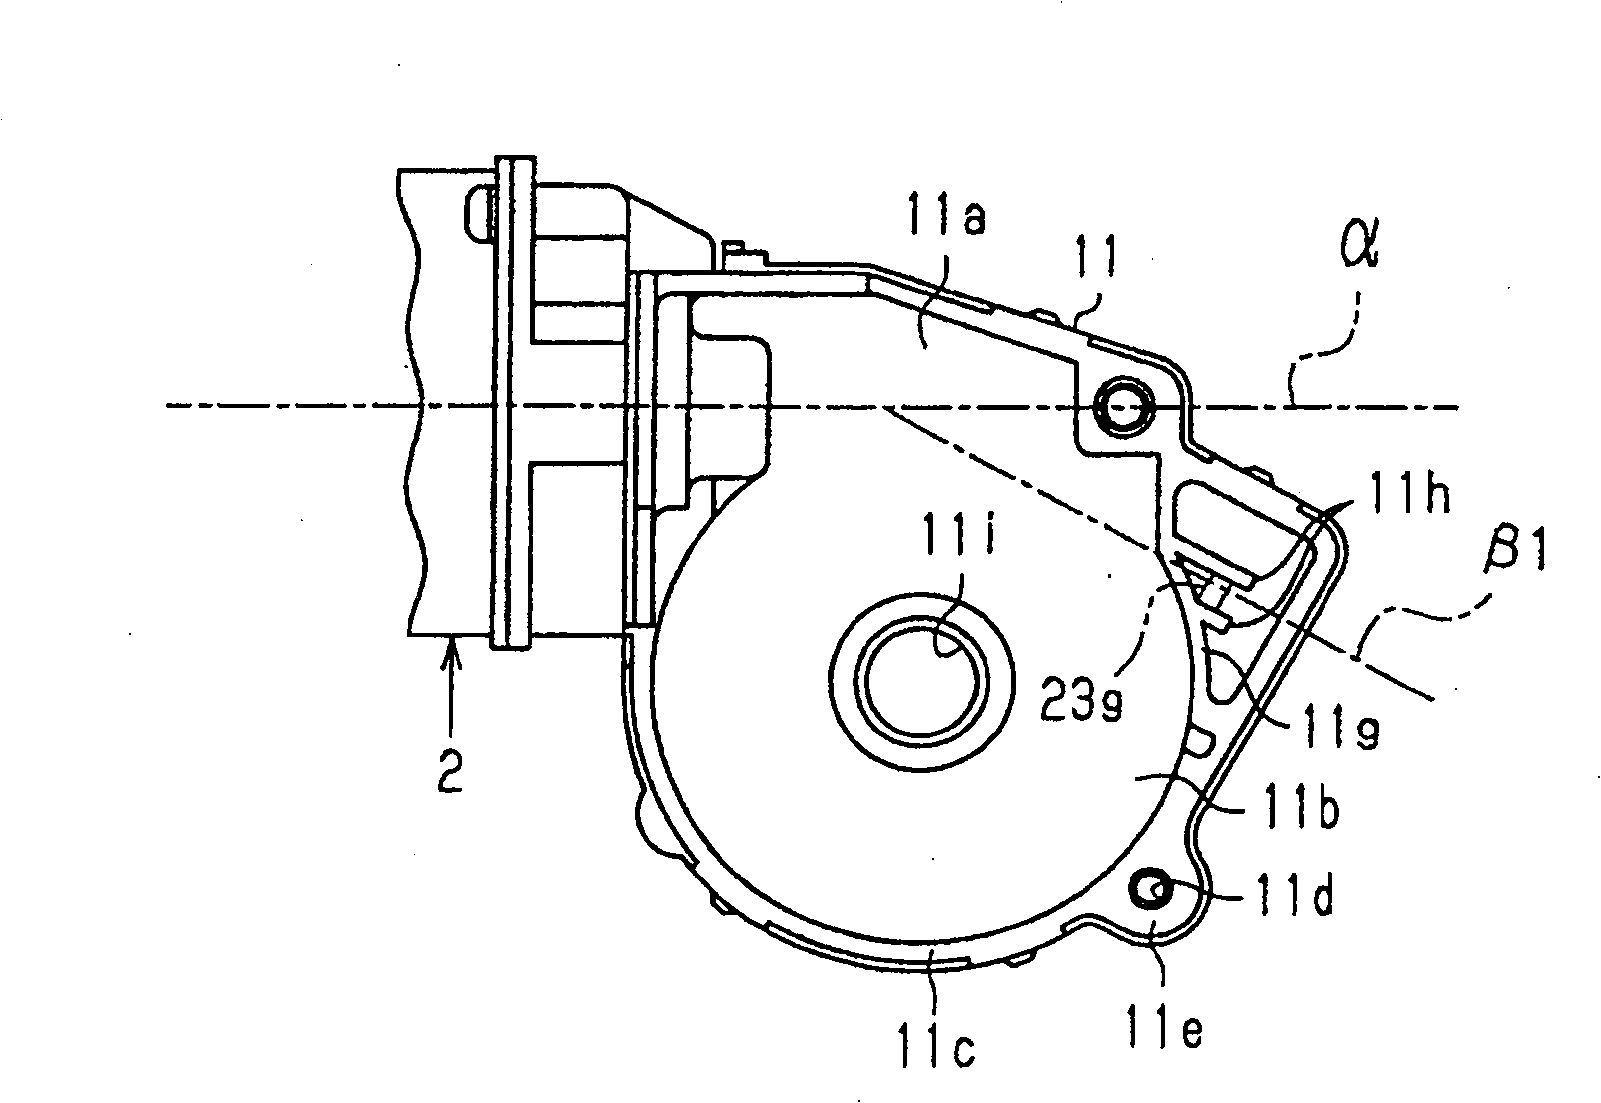 Casing structure and motor